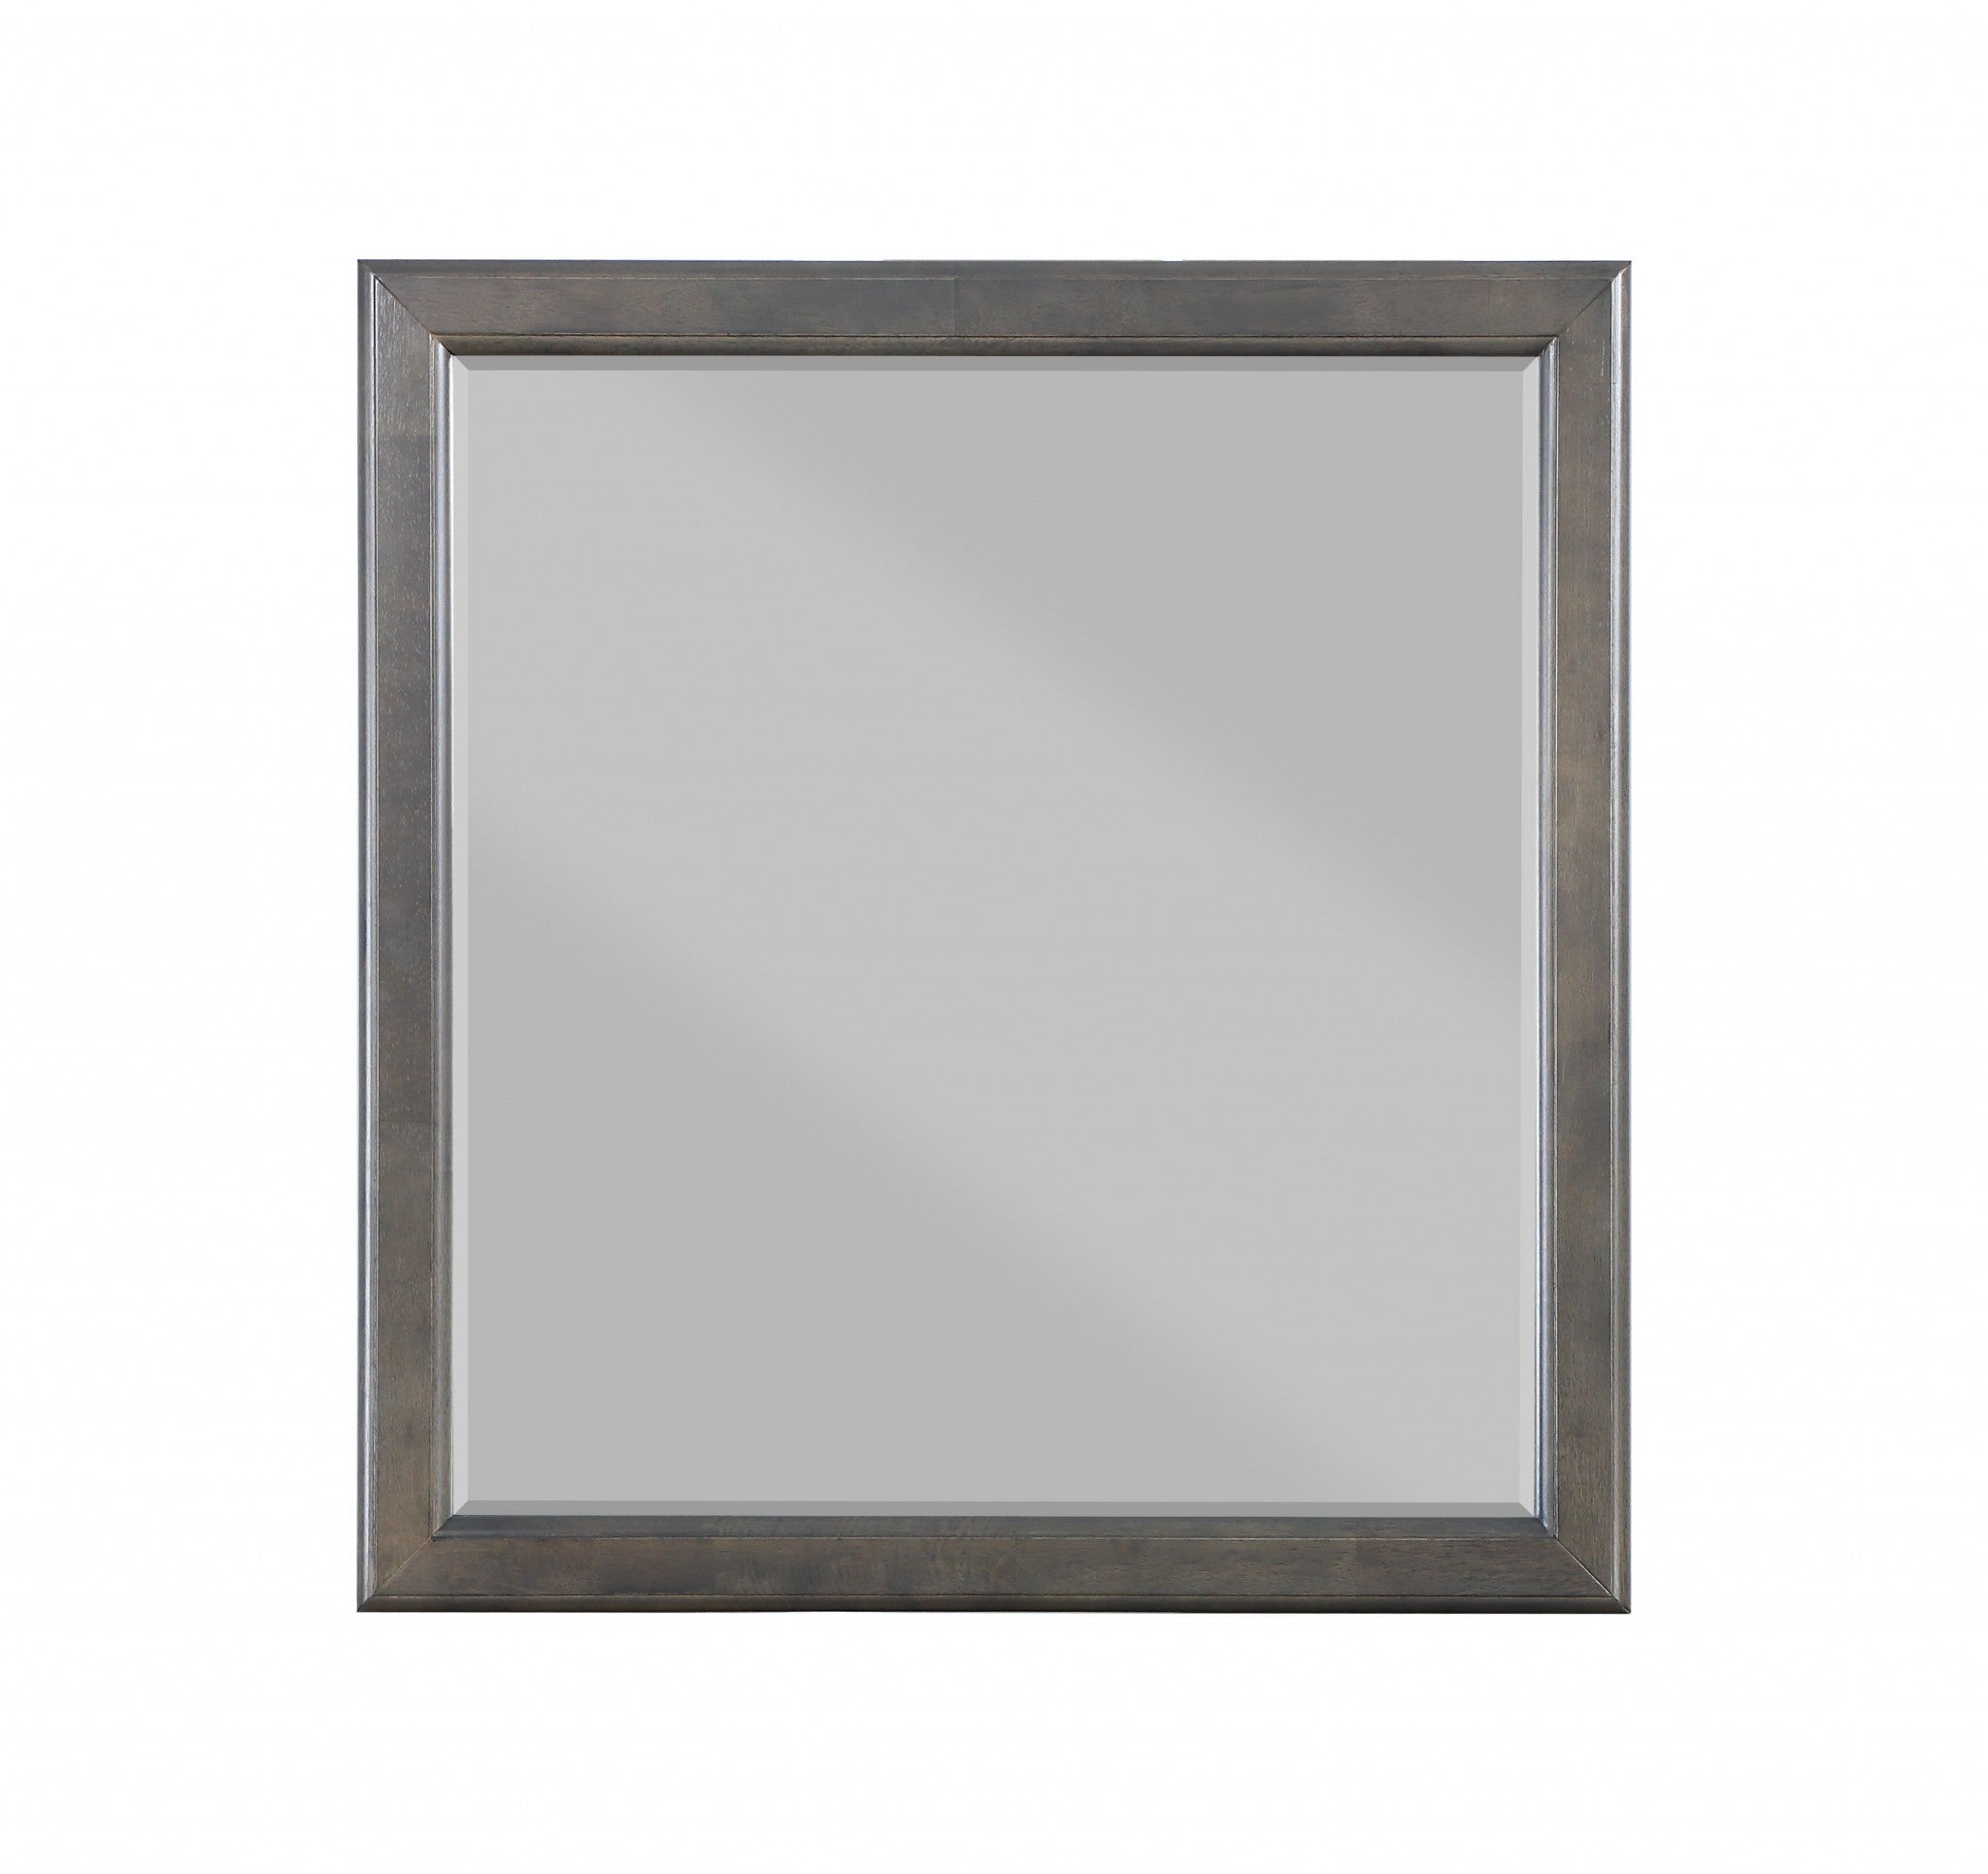 38" Rectangle Wall Mounted Accent Mirror